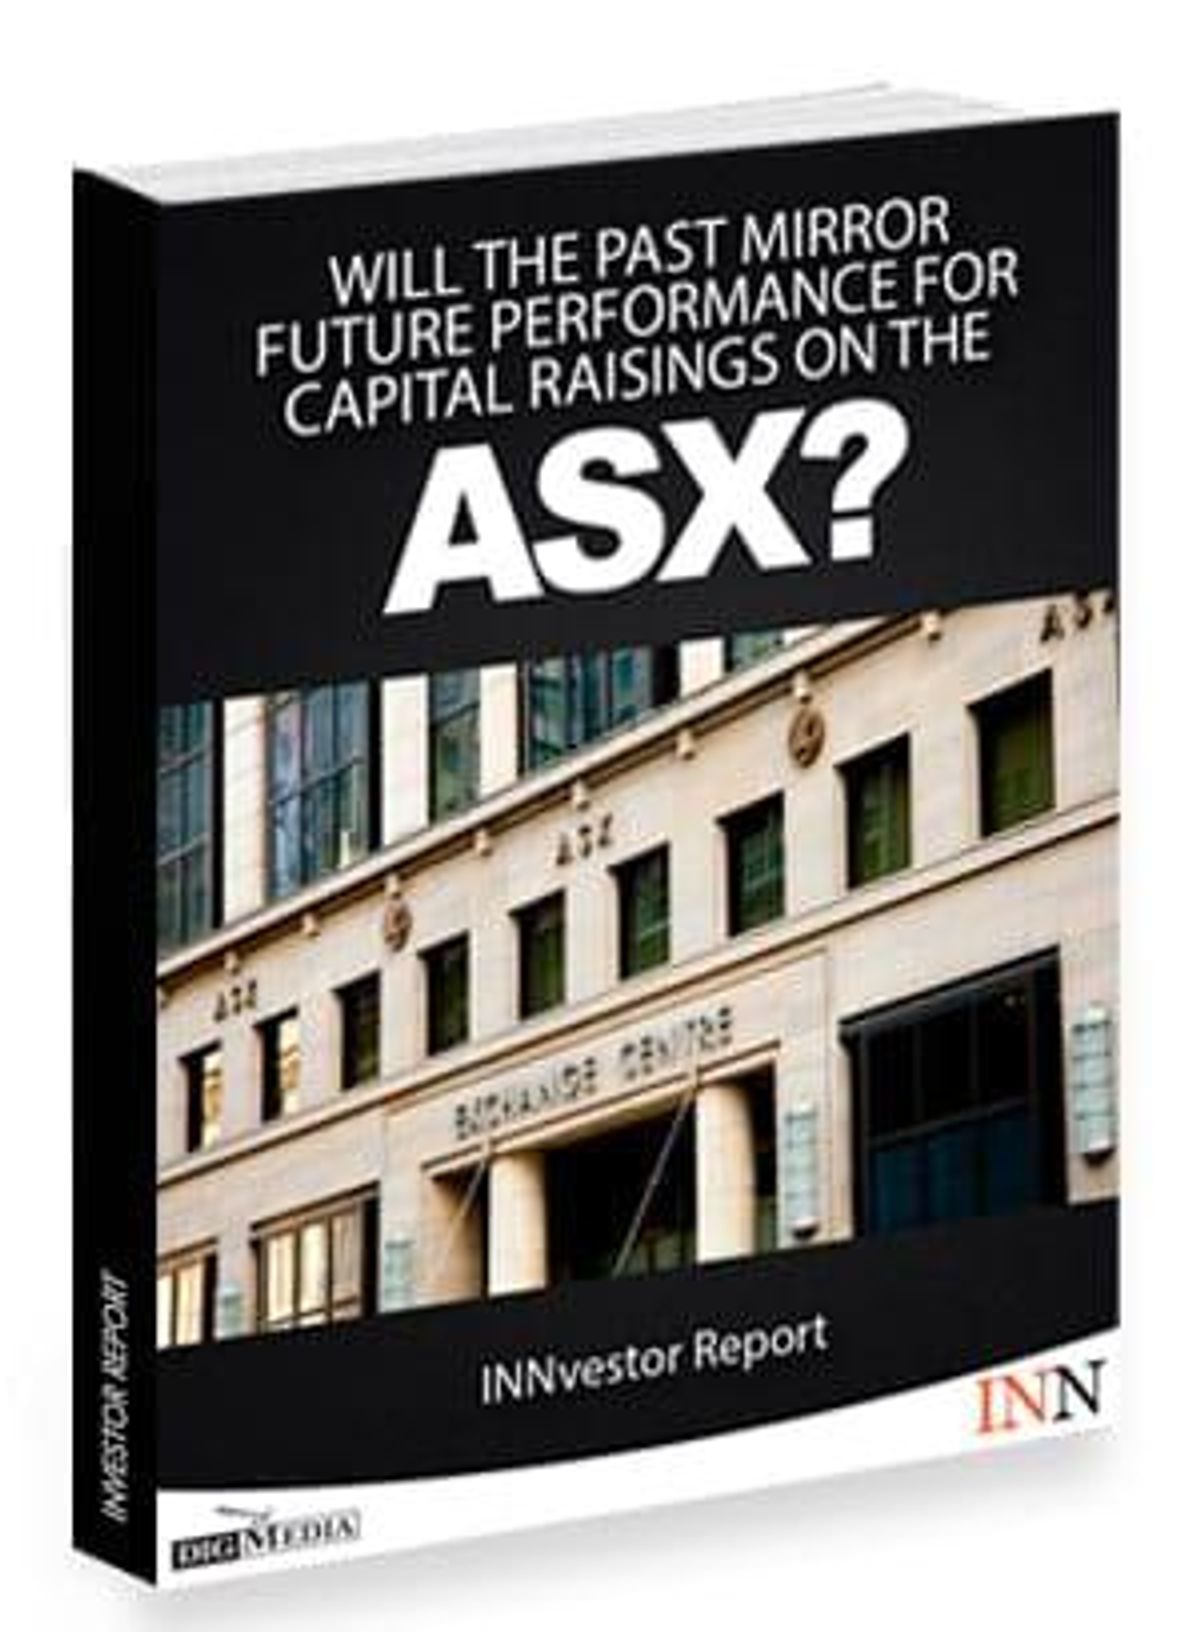 Will The Past Mirror Future Performance For Capital Raisings On The ASX?